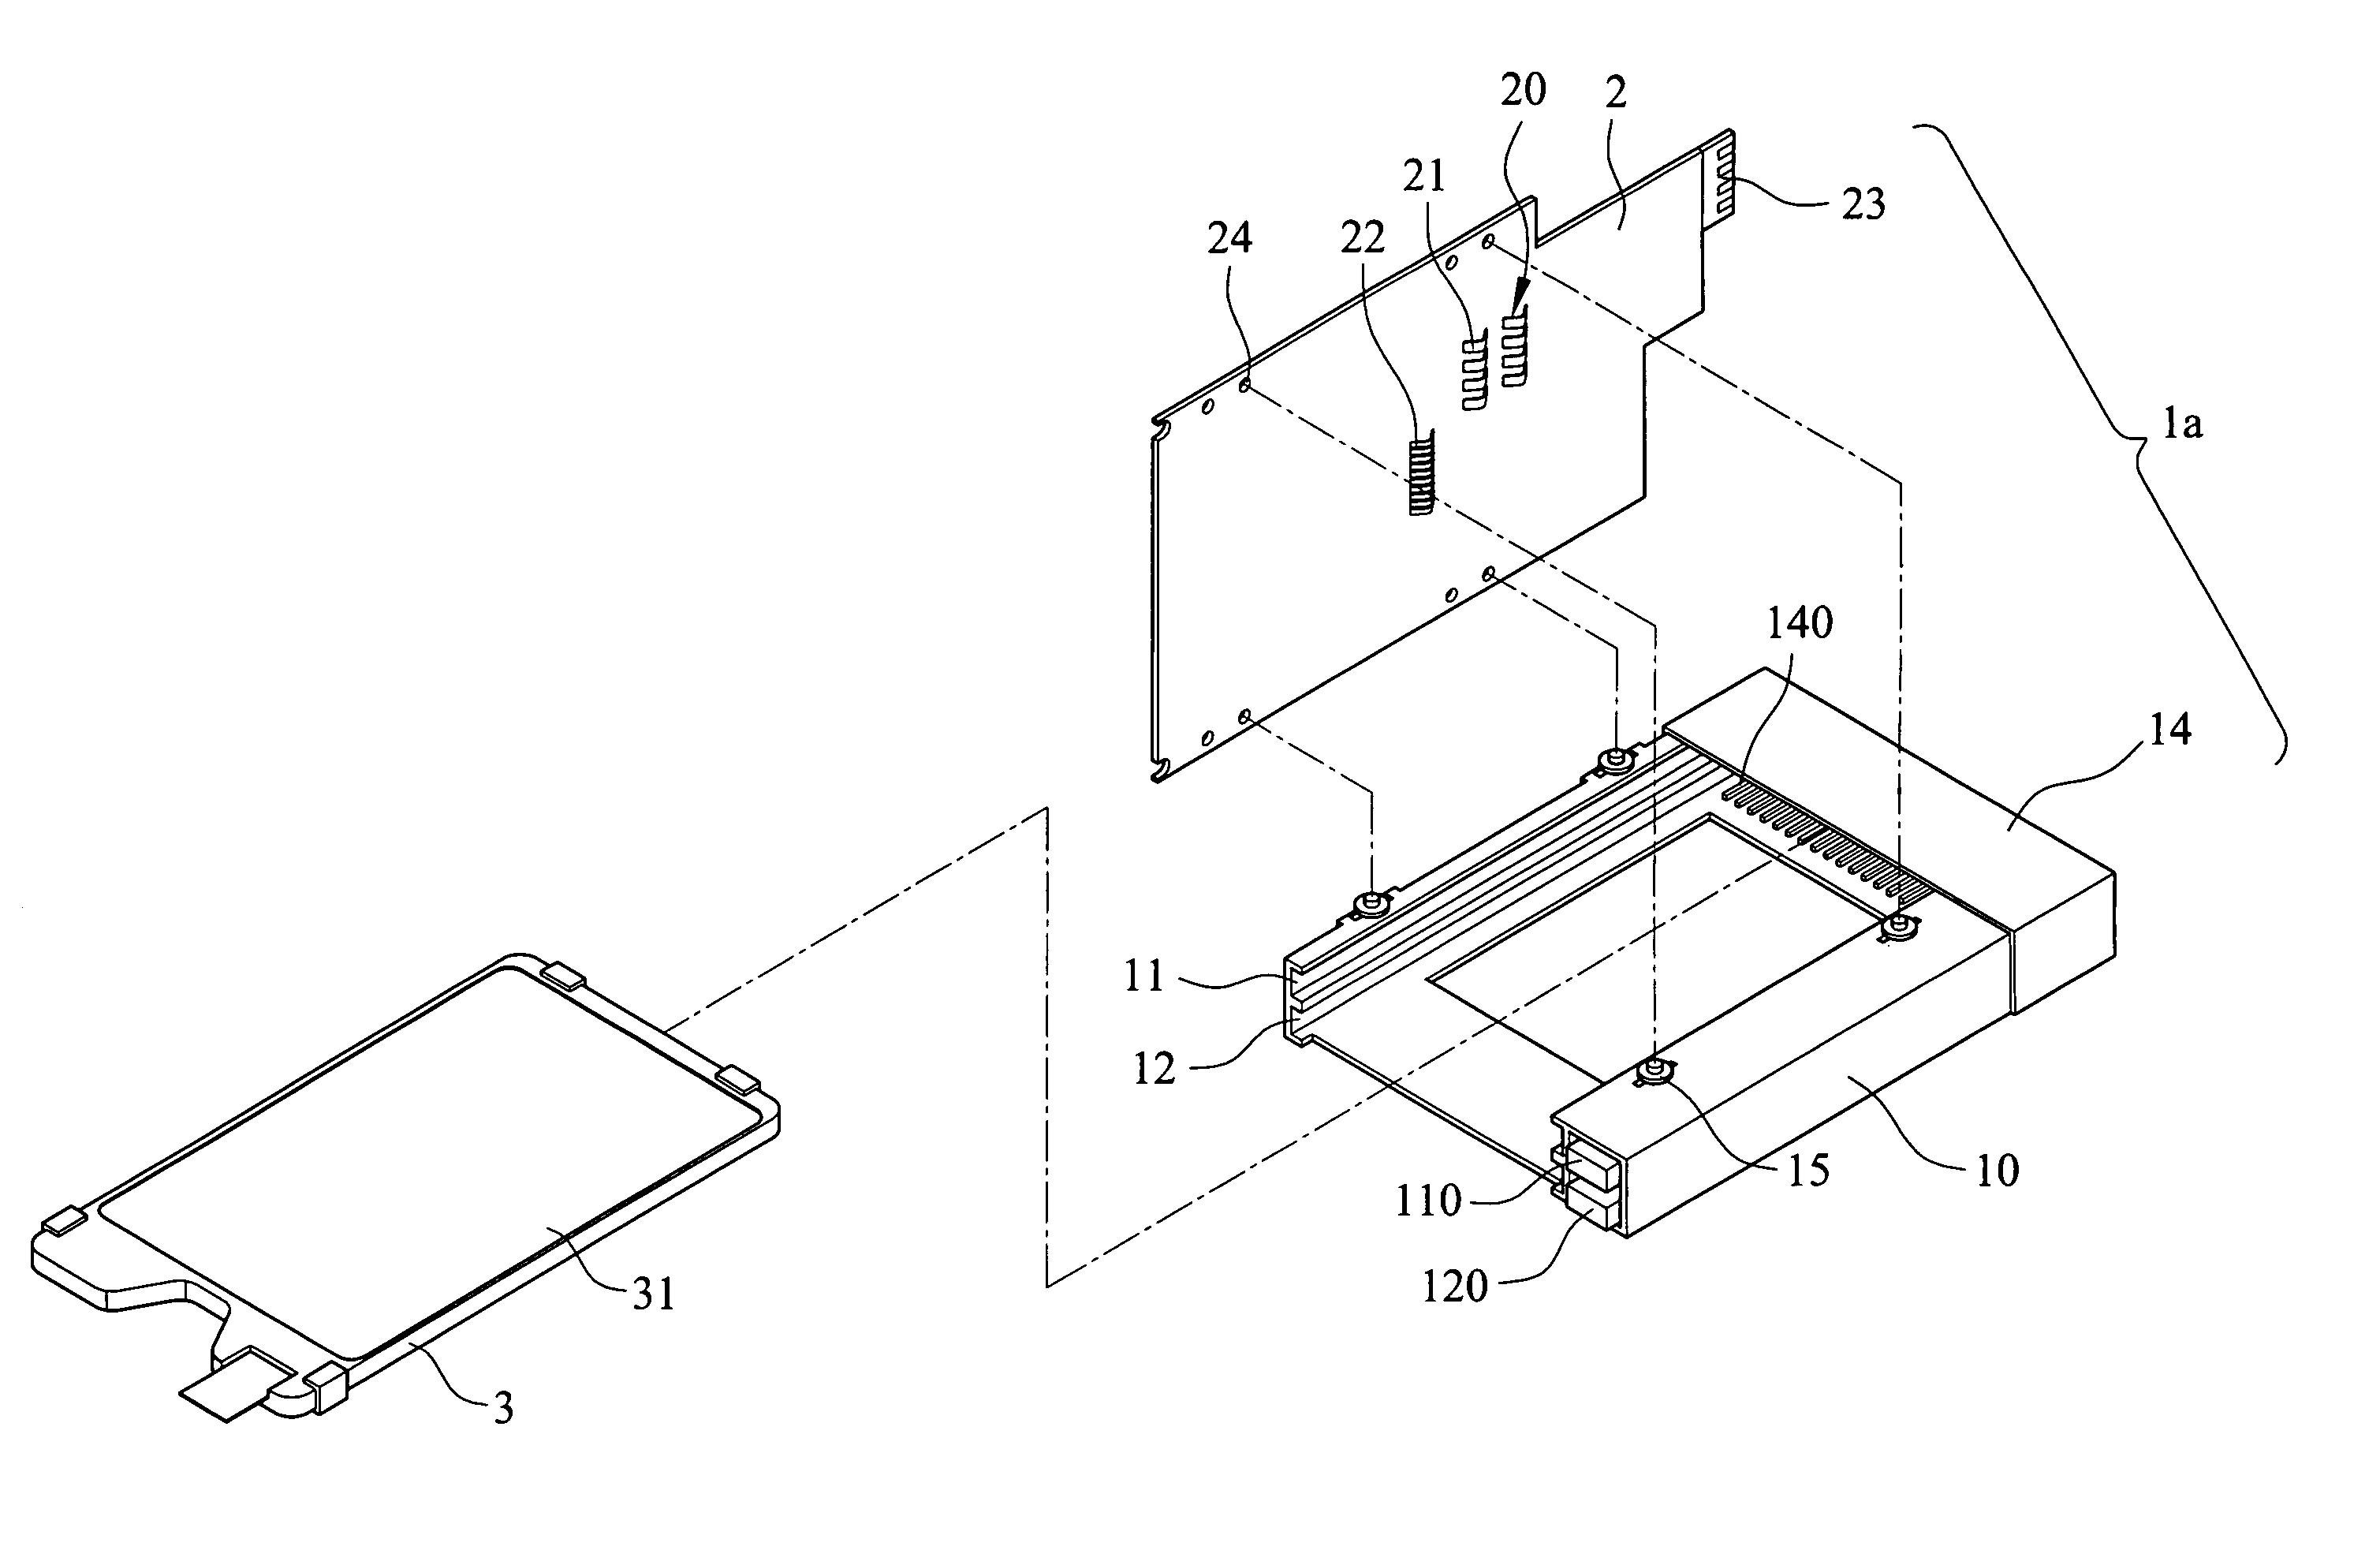 Adaptor device for connecting and accessing data card and computer device incorporating the adaptor device